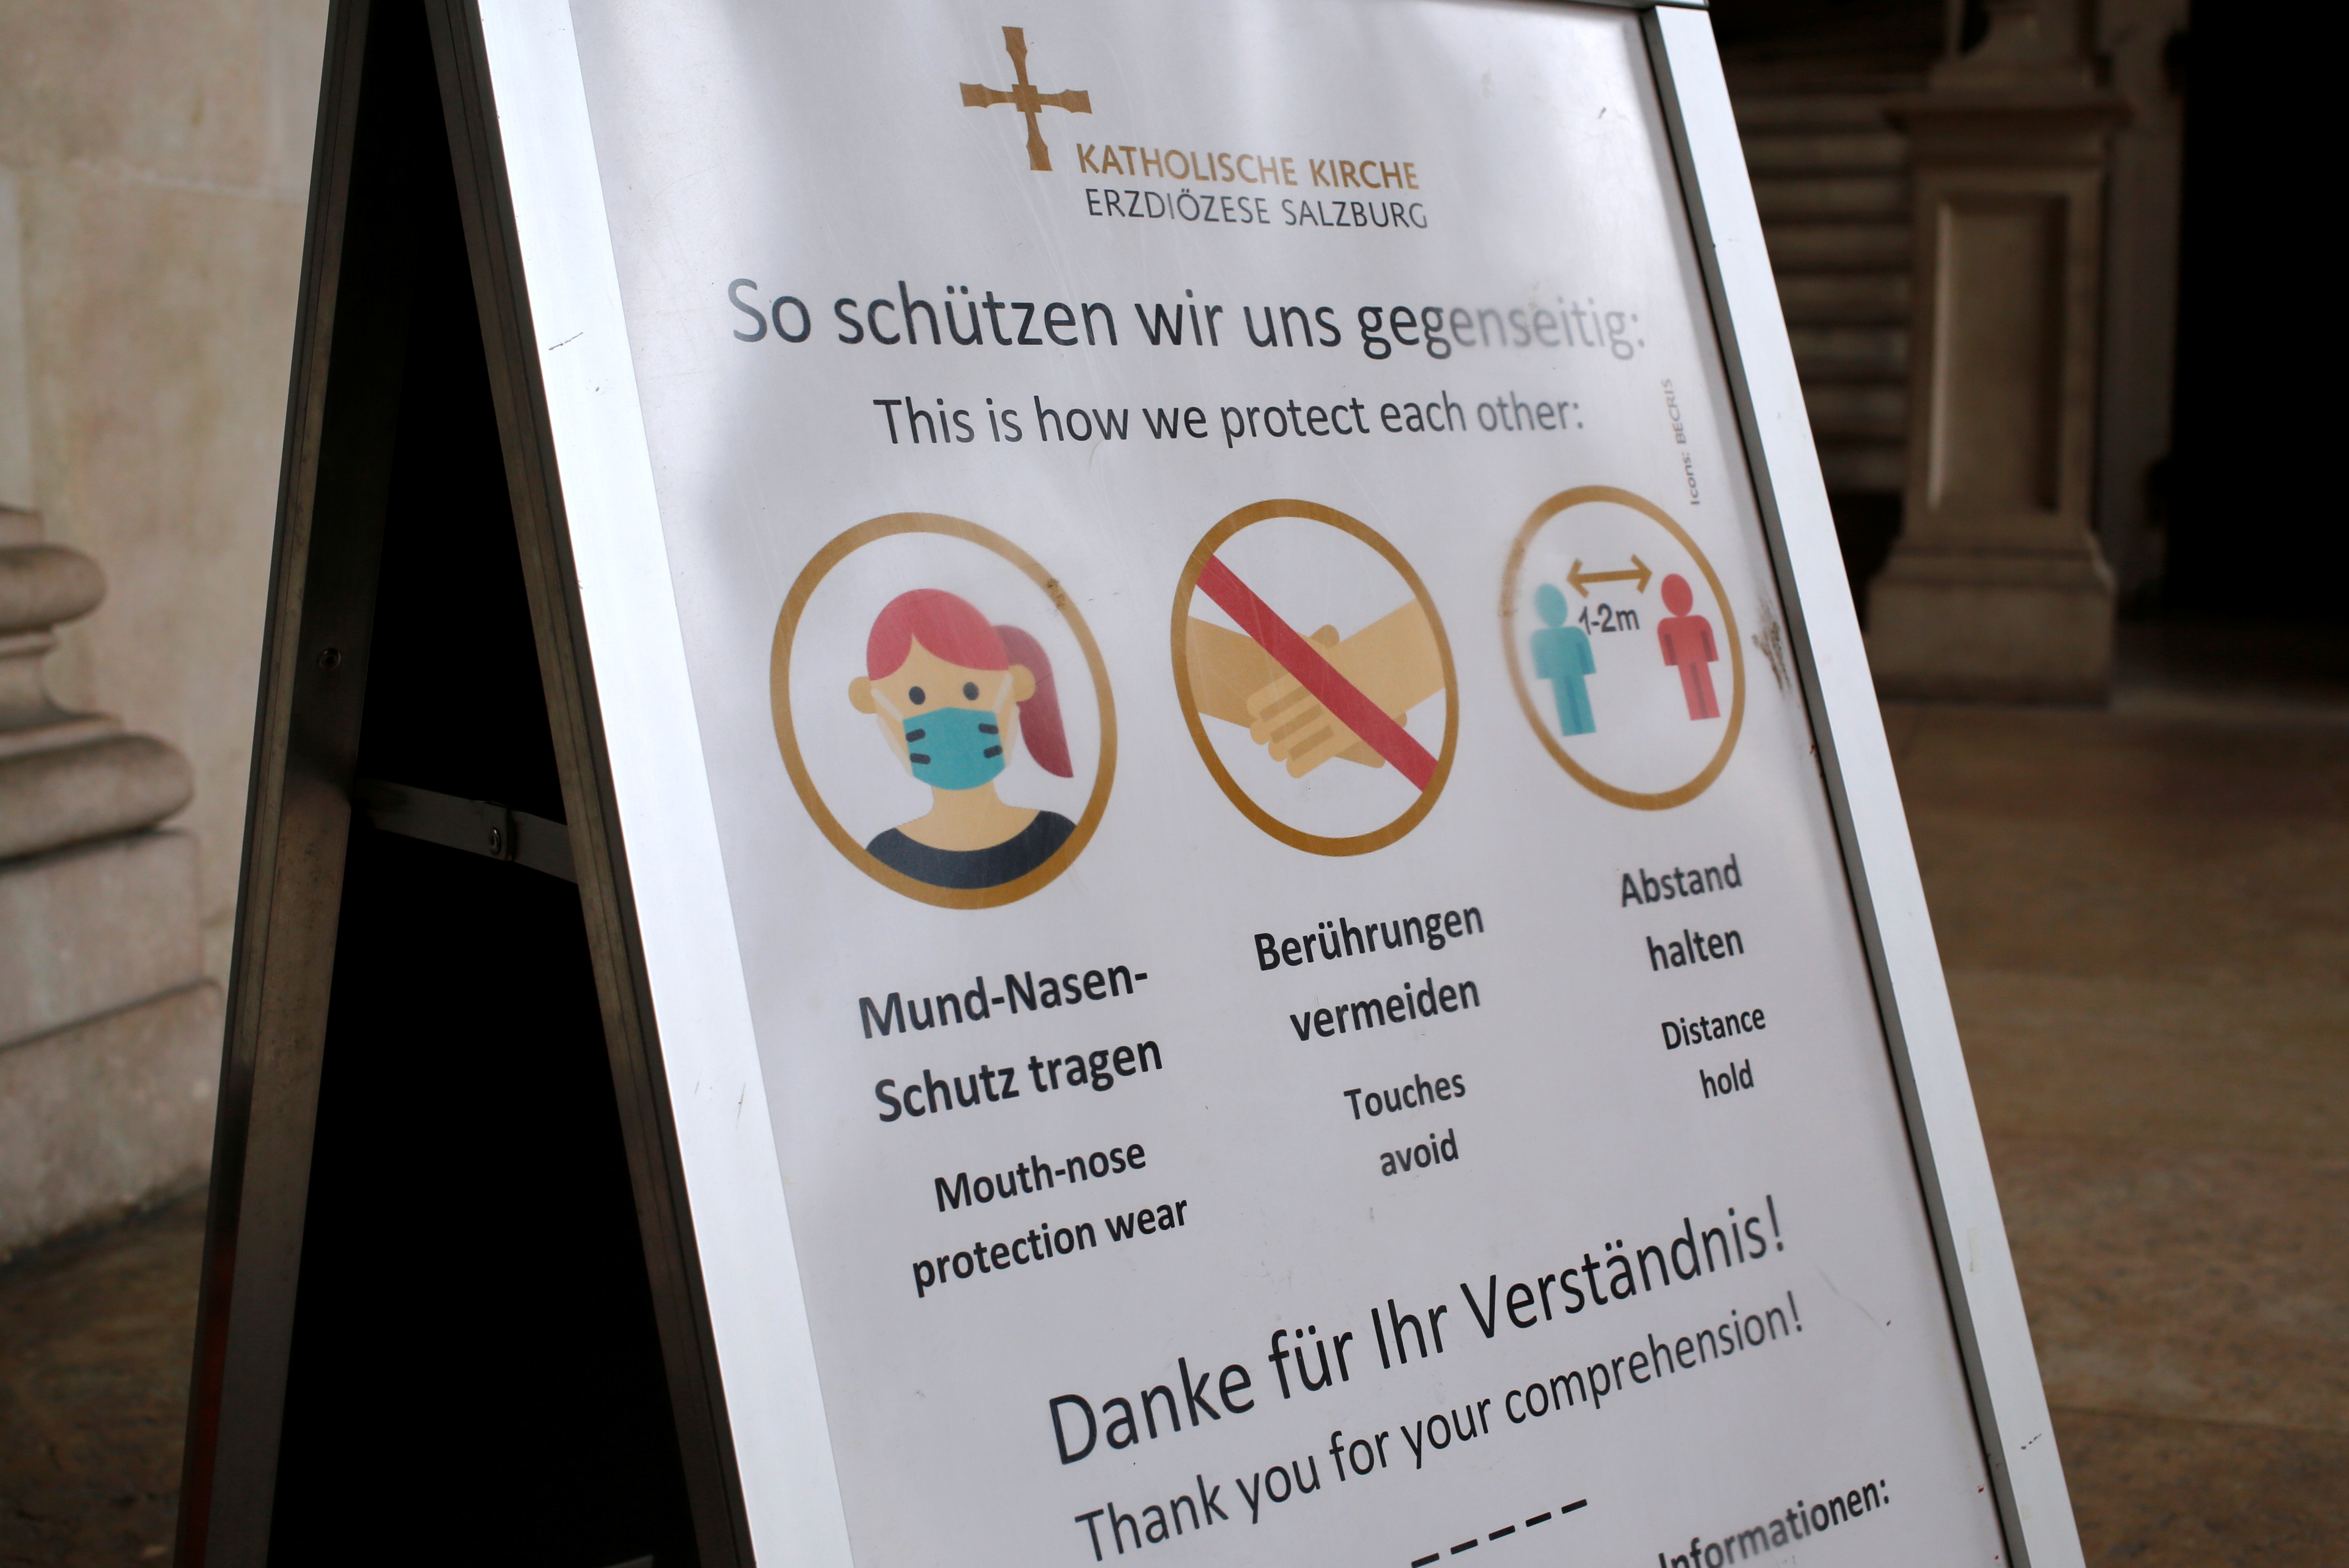 Health protection info sign is seen at a church entrance in Salzburg